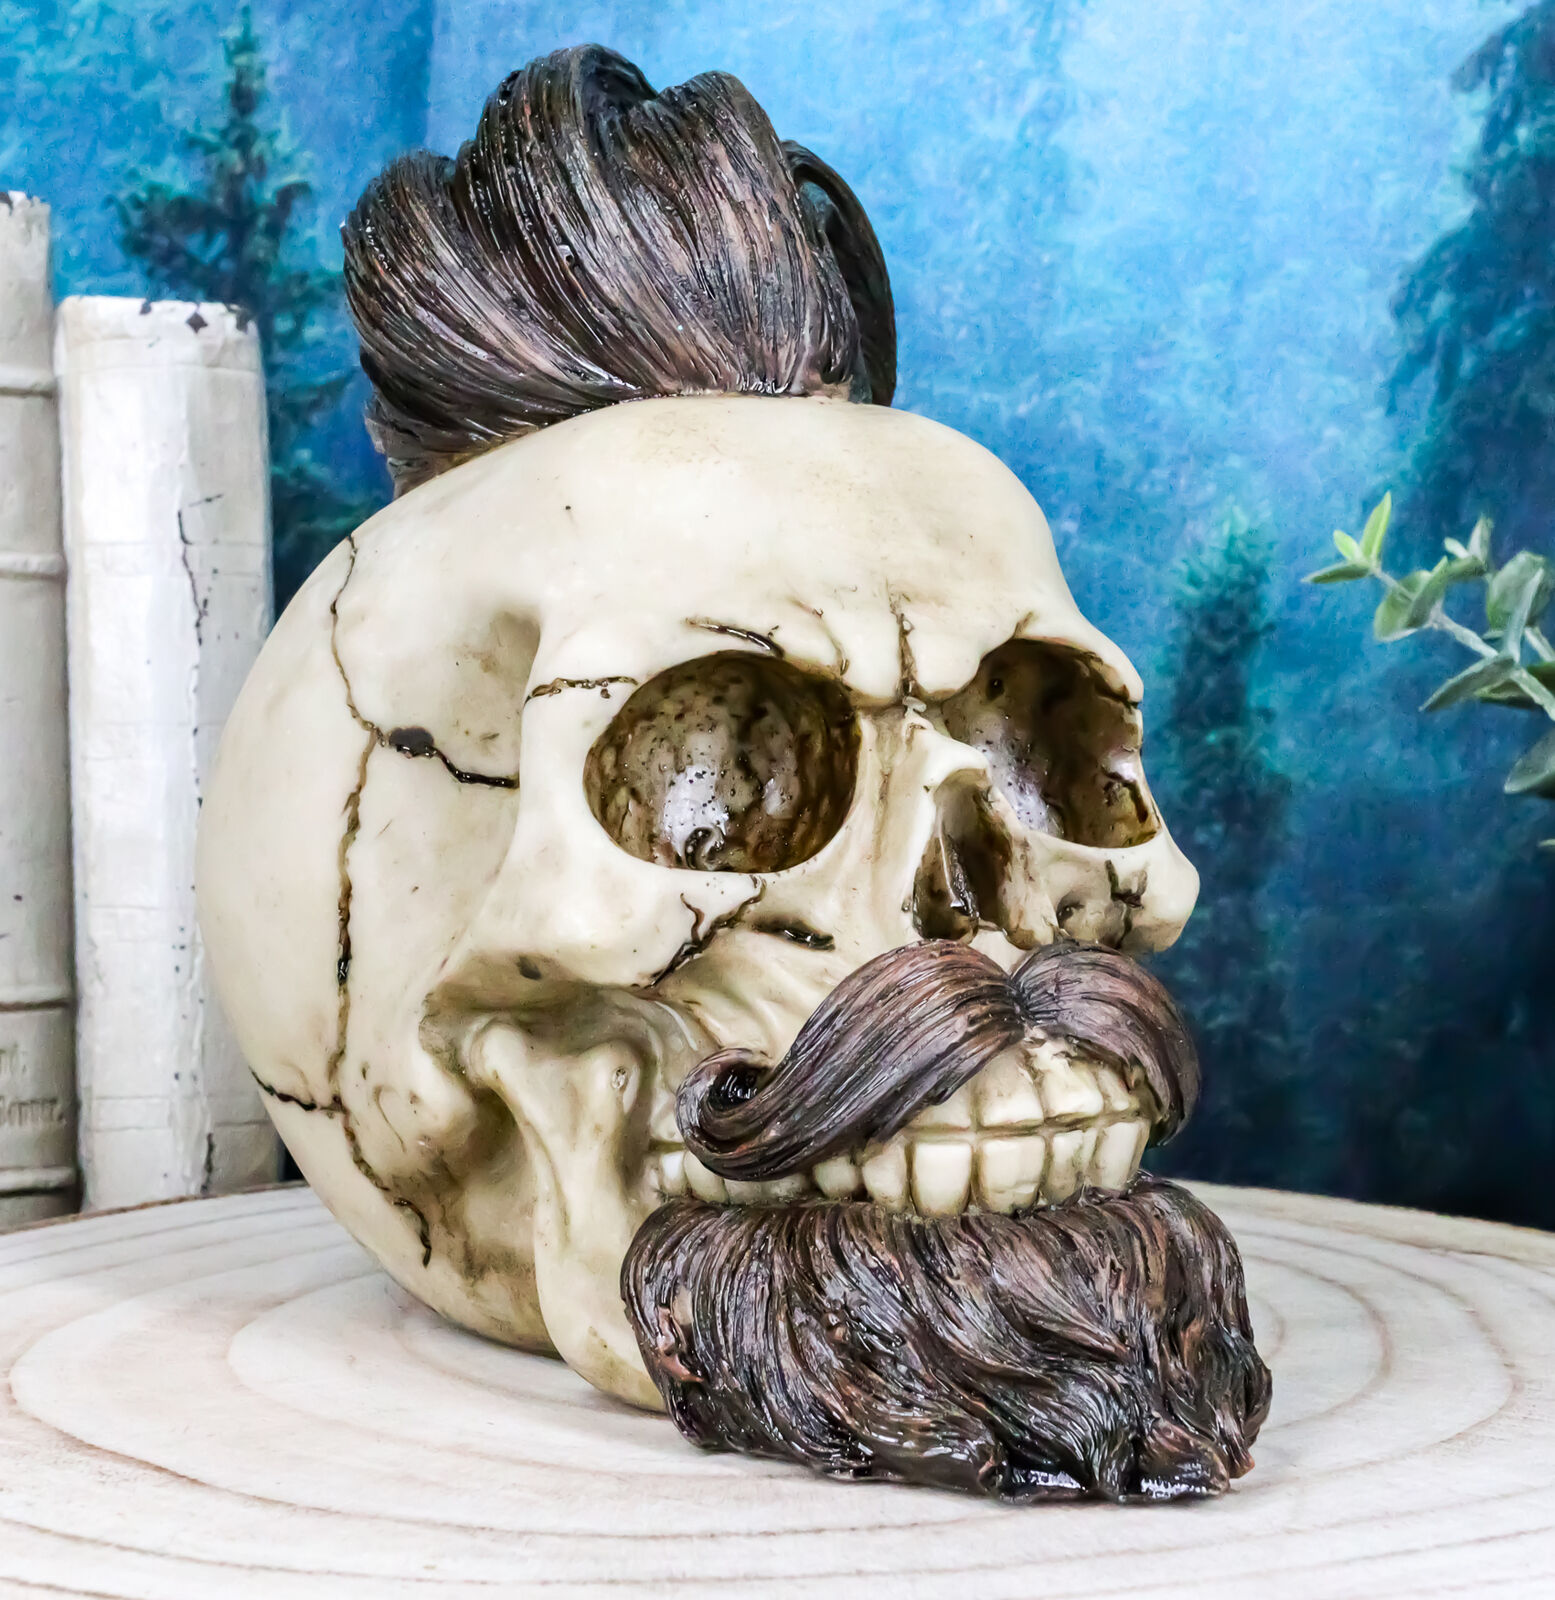 Bearded Skull with Stylish Haircut and Curled Mustache Figurine Halloween Decor